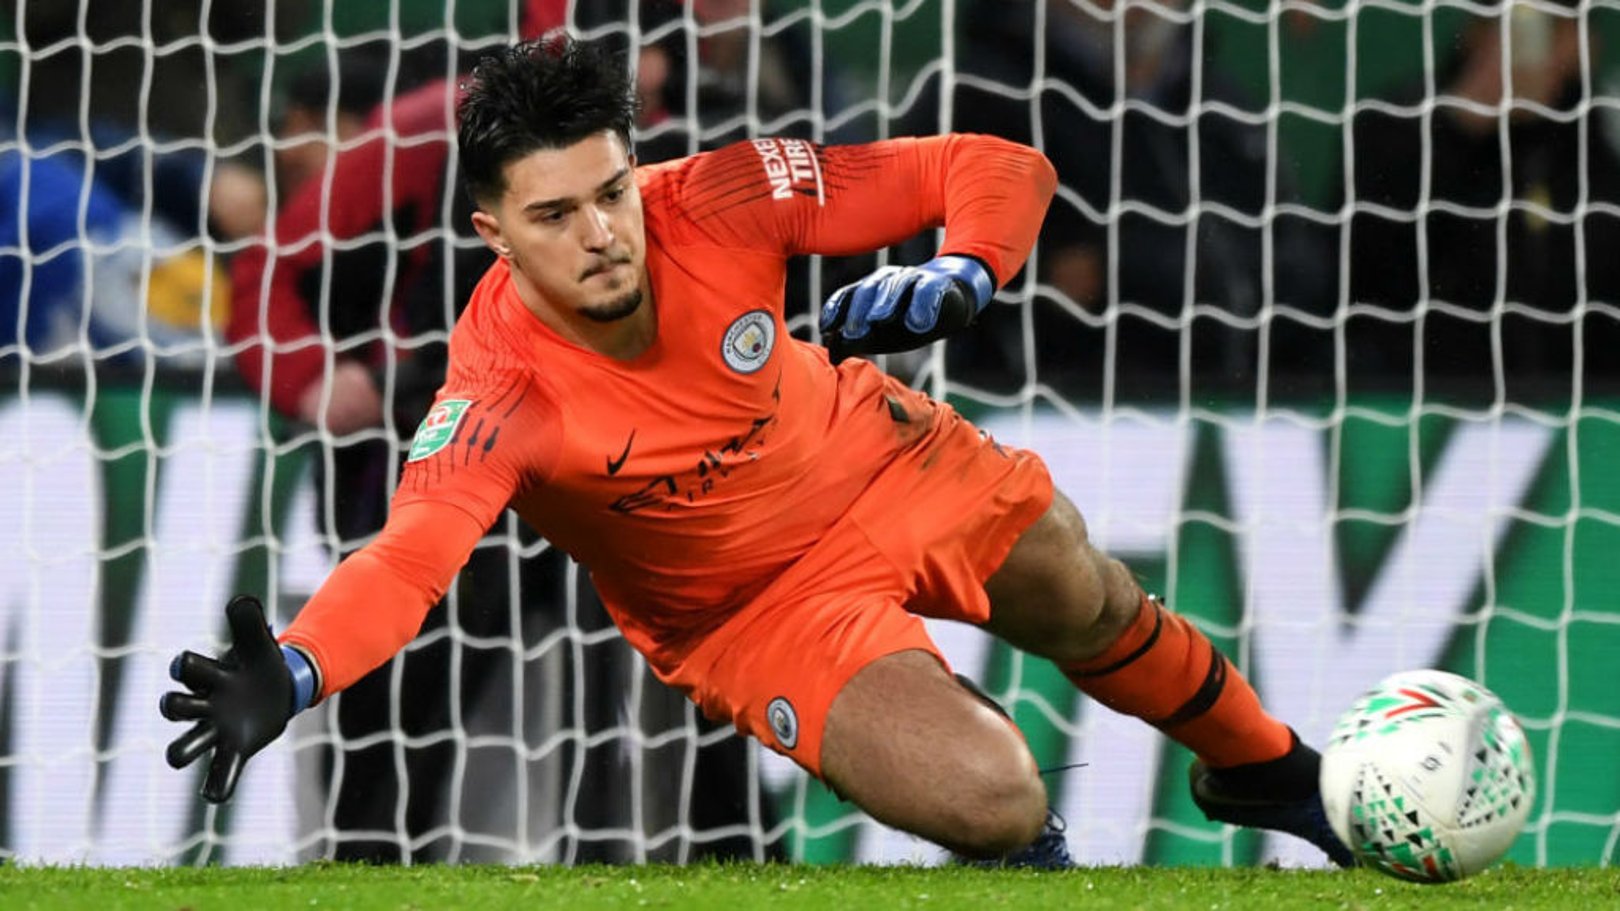 SPOT ON: Aro Muric saves one of Leicester's penalty kicks